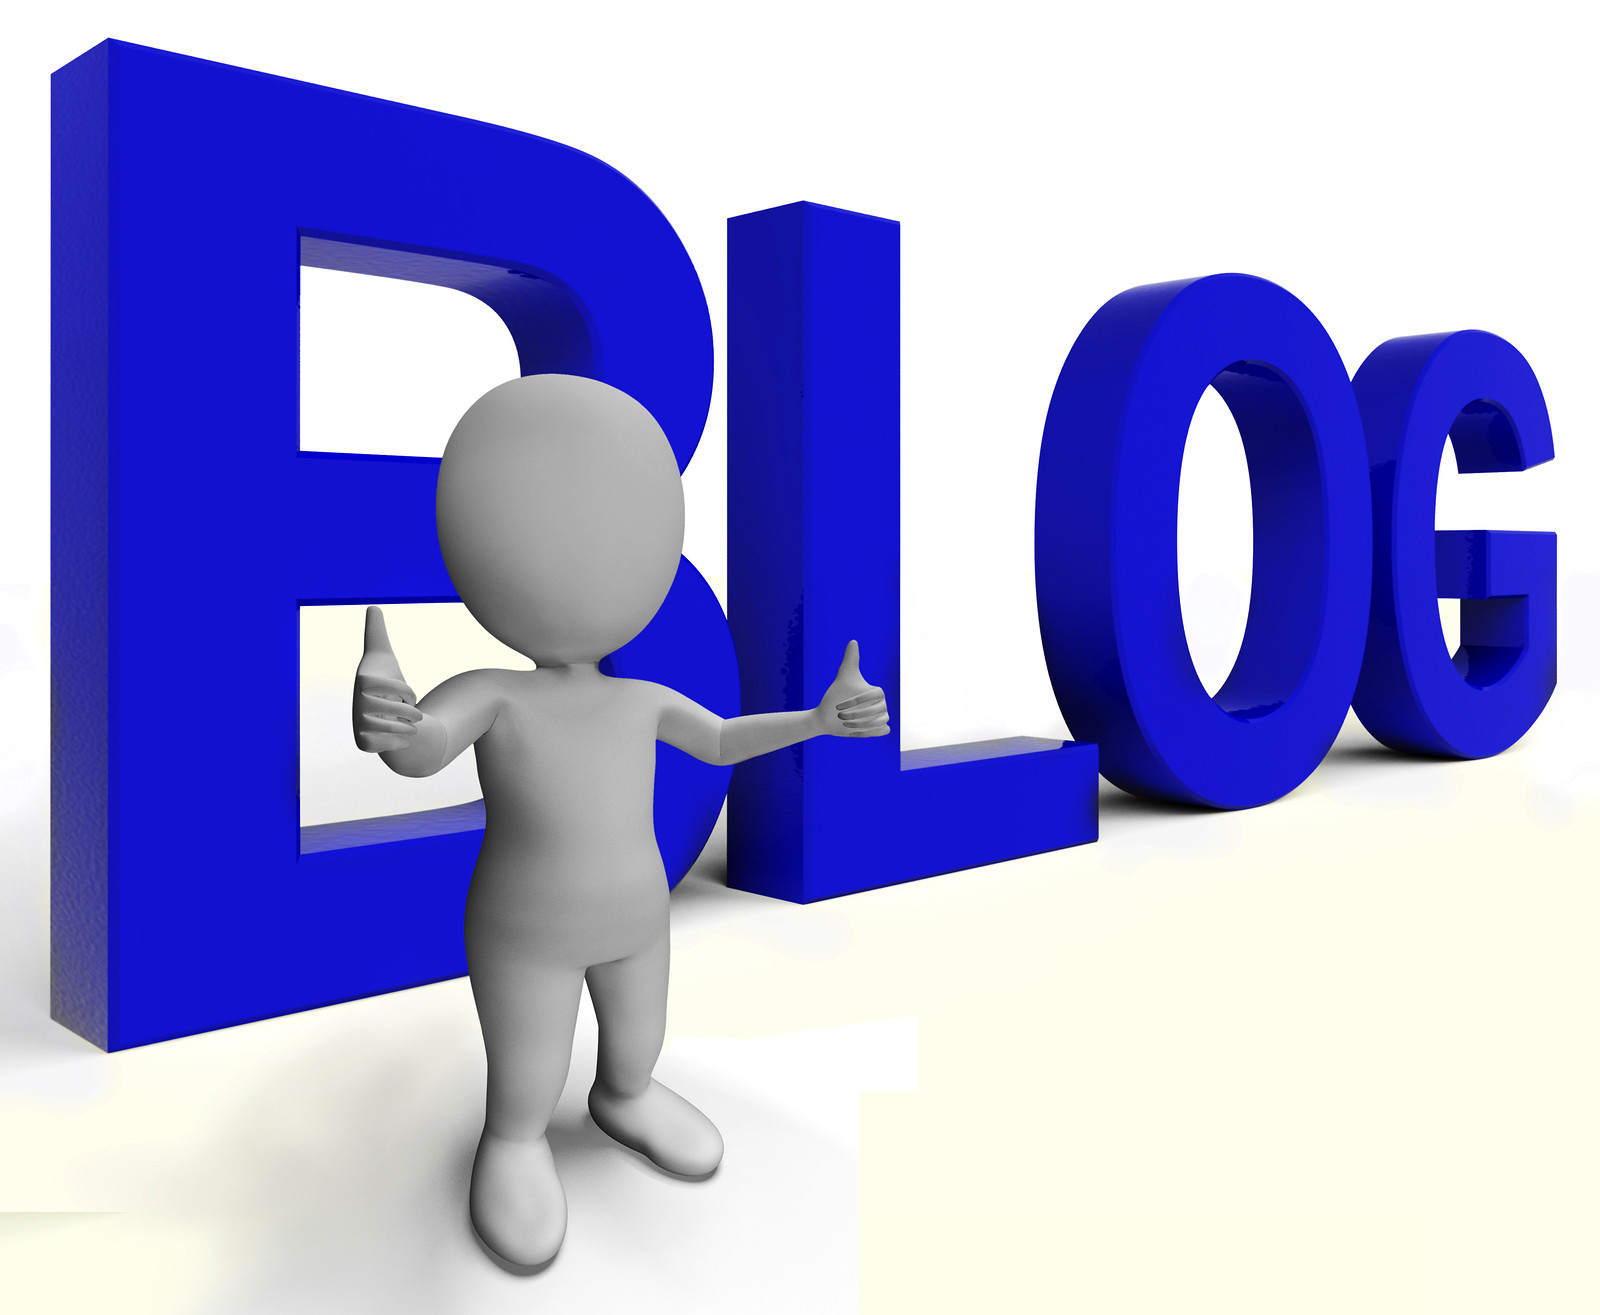 Top 15 Blog Posts for 2015